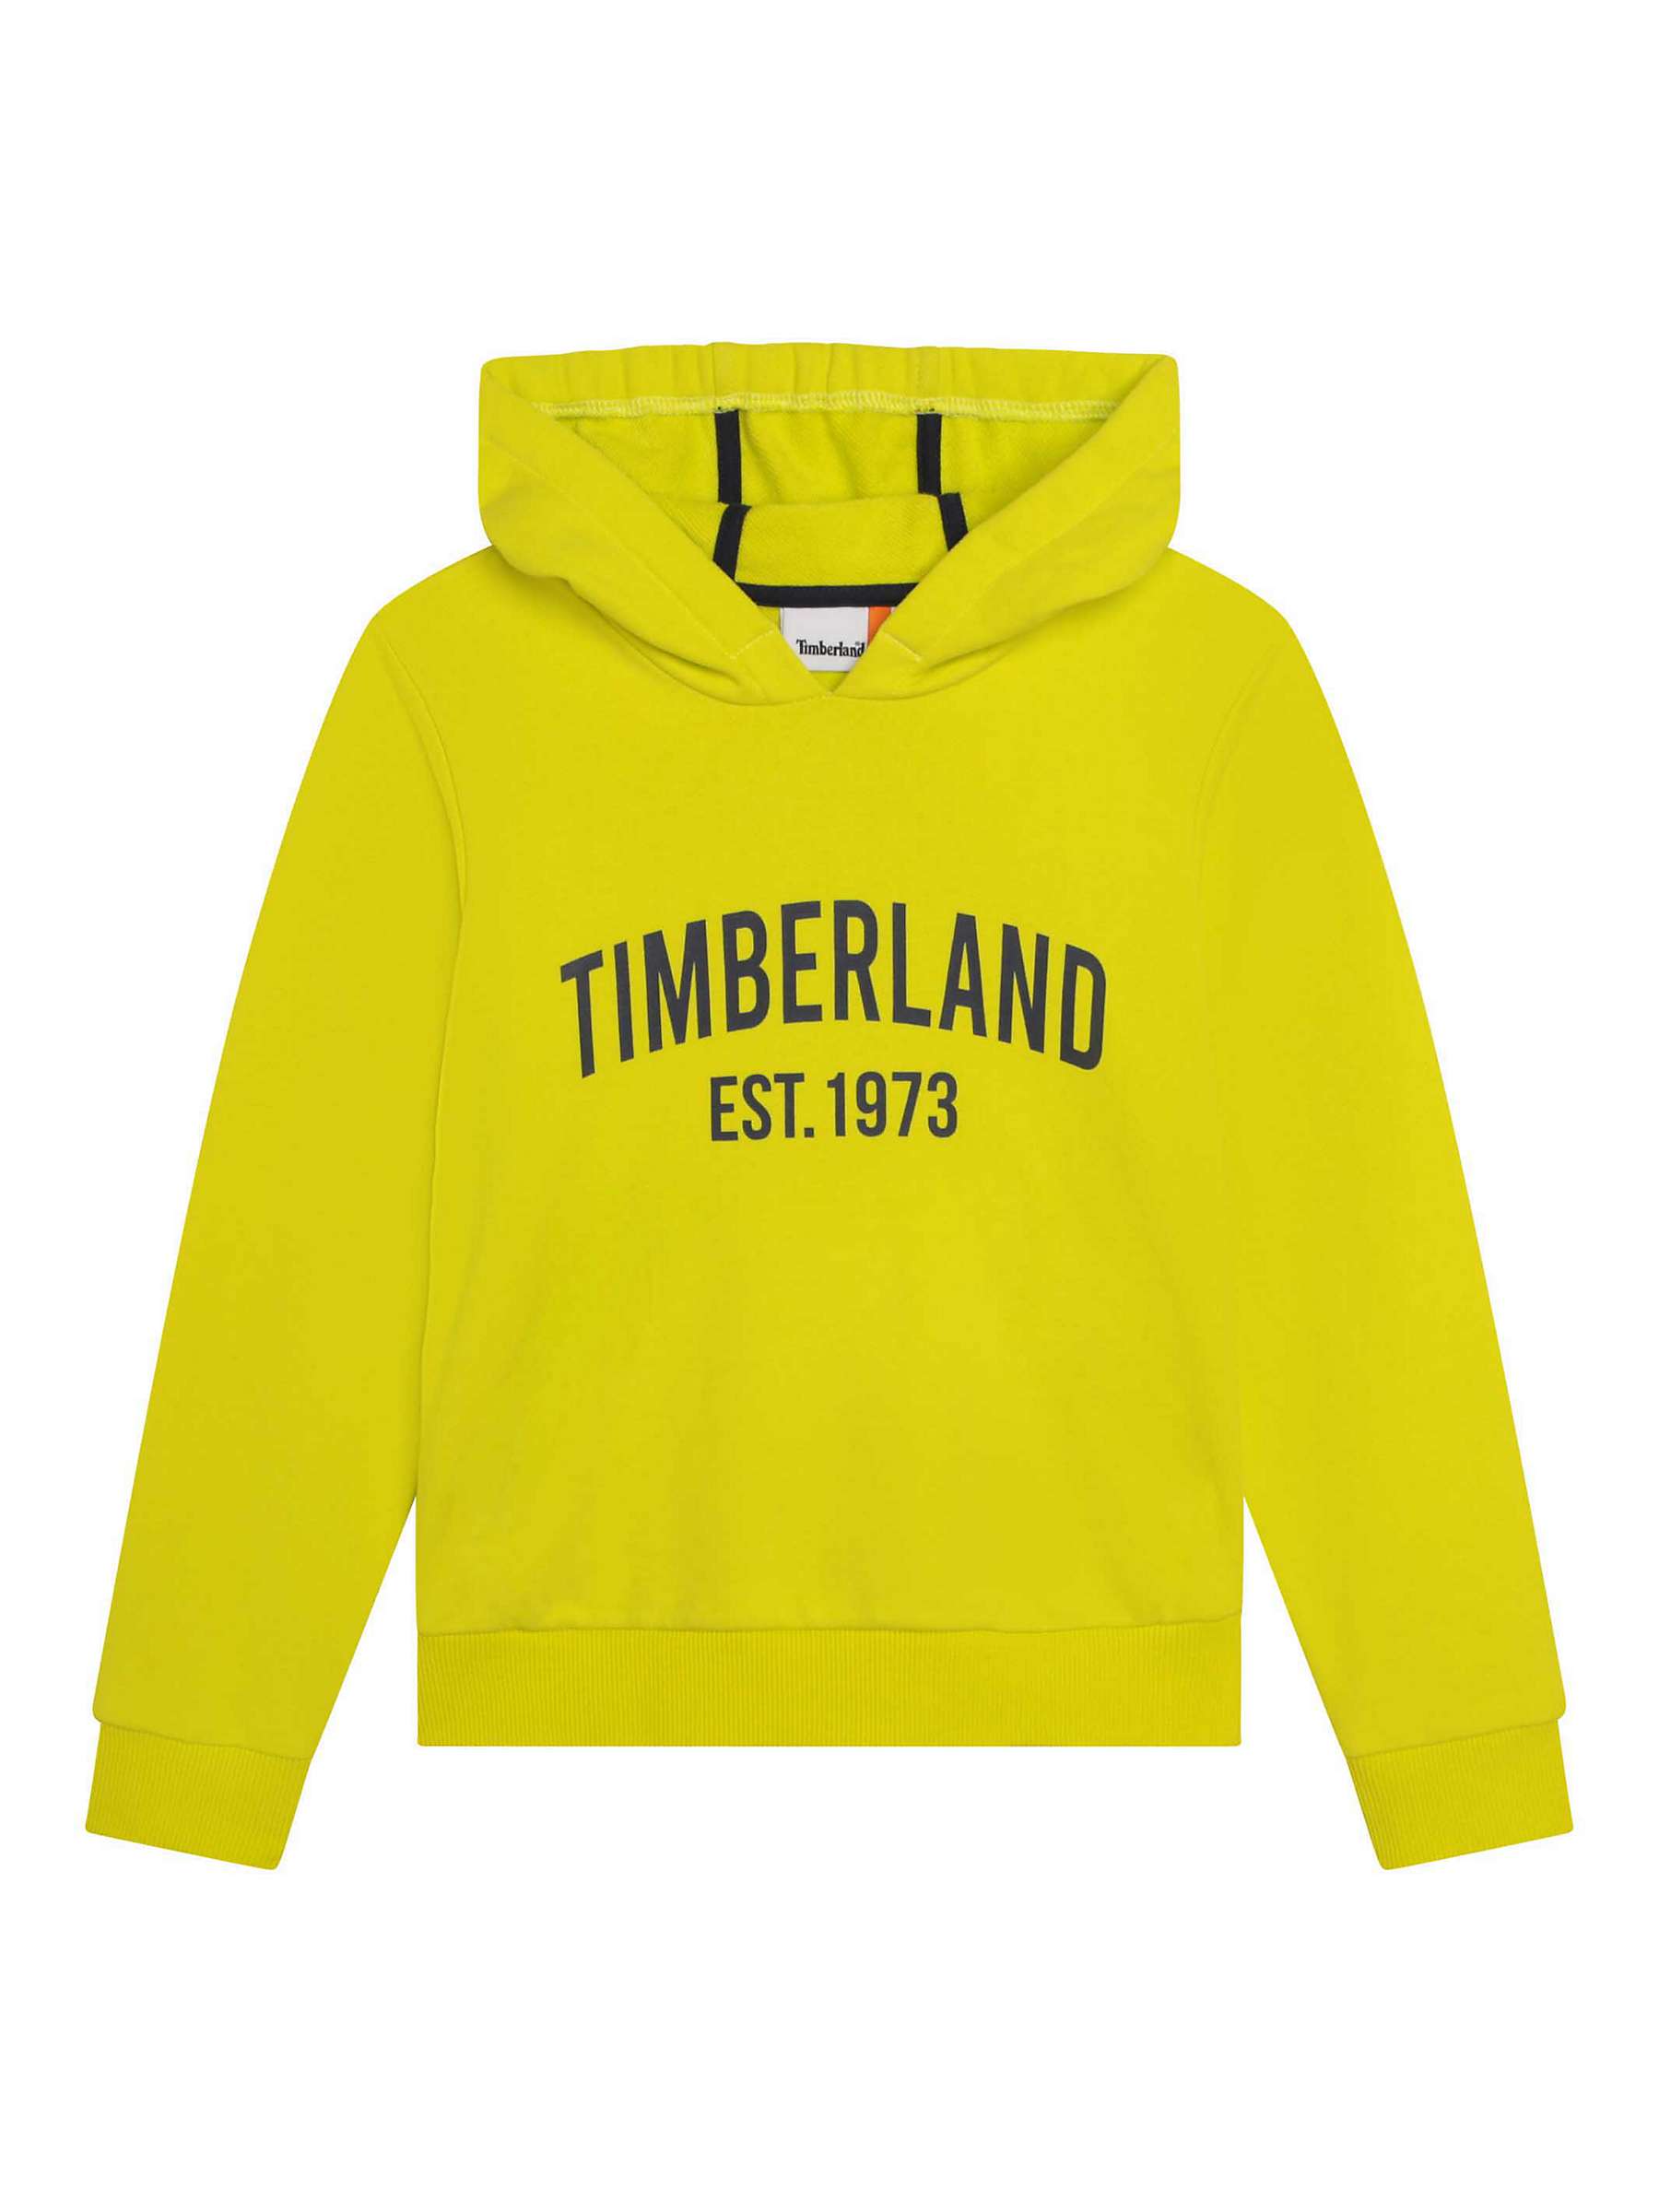 Buy Timberland Kids' Logo Embroidered Hoodie, Yellow/Multi Online at johnlewis.com